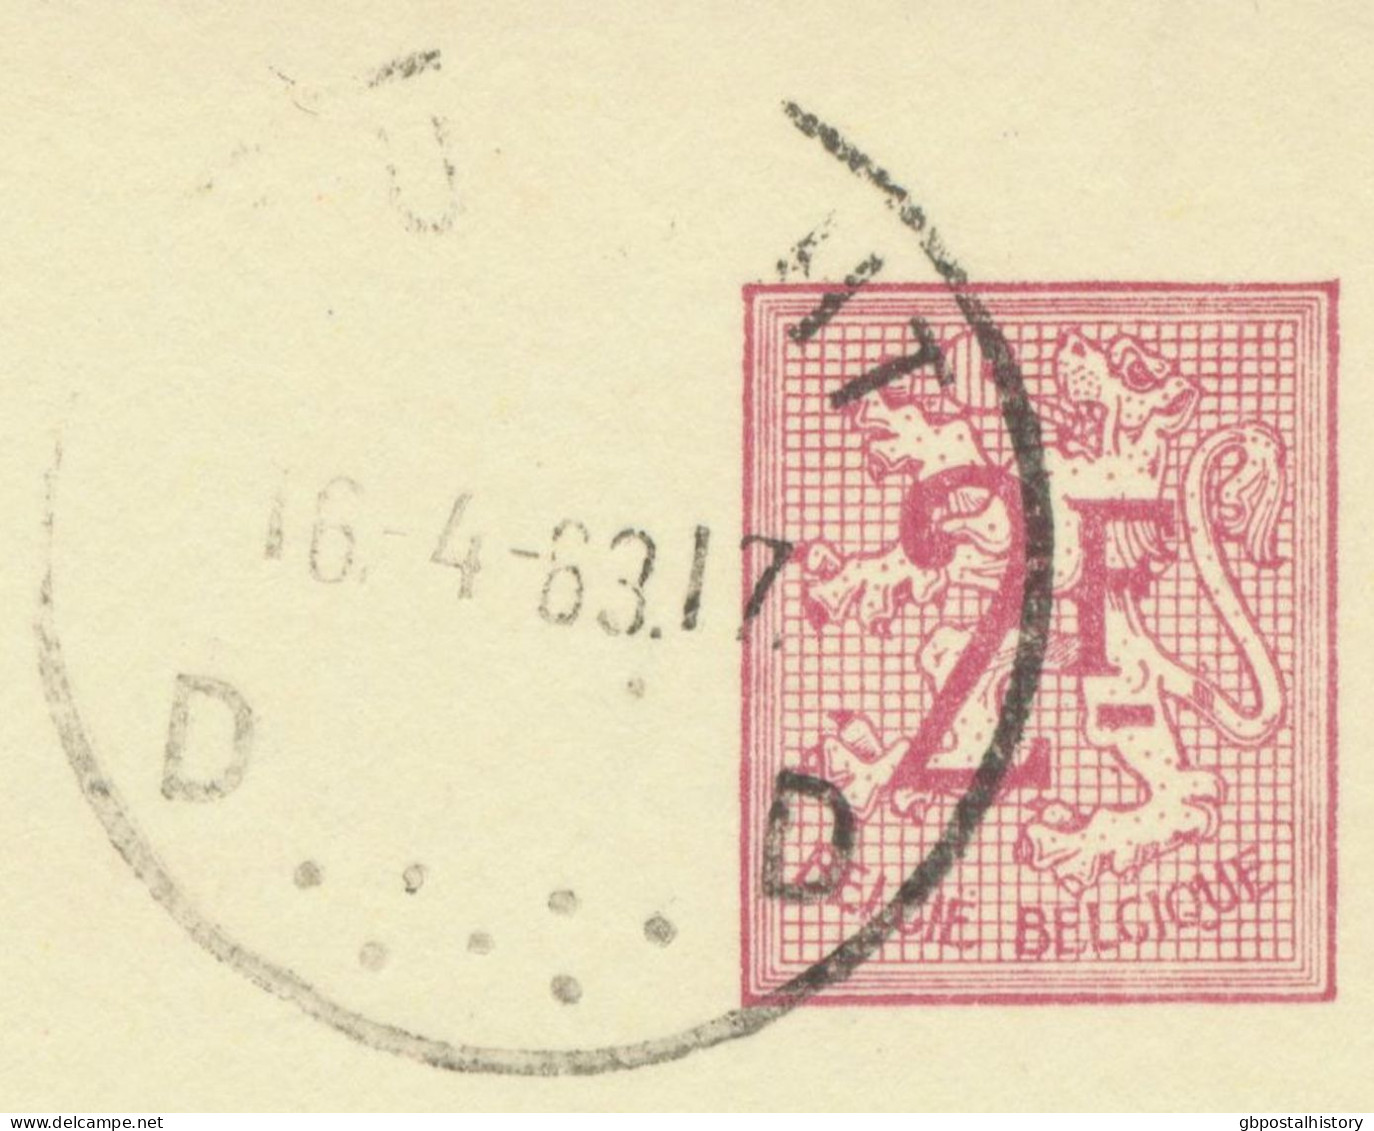 BELGIUM VILLAGE POSTMARKS  BURCHT D (now Zwijndrecht) SC With Dots 1963 (Postal Stationery 2 F, PUBLIBEL 1904) - Annulli A Punti